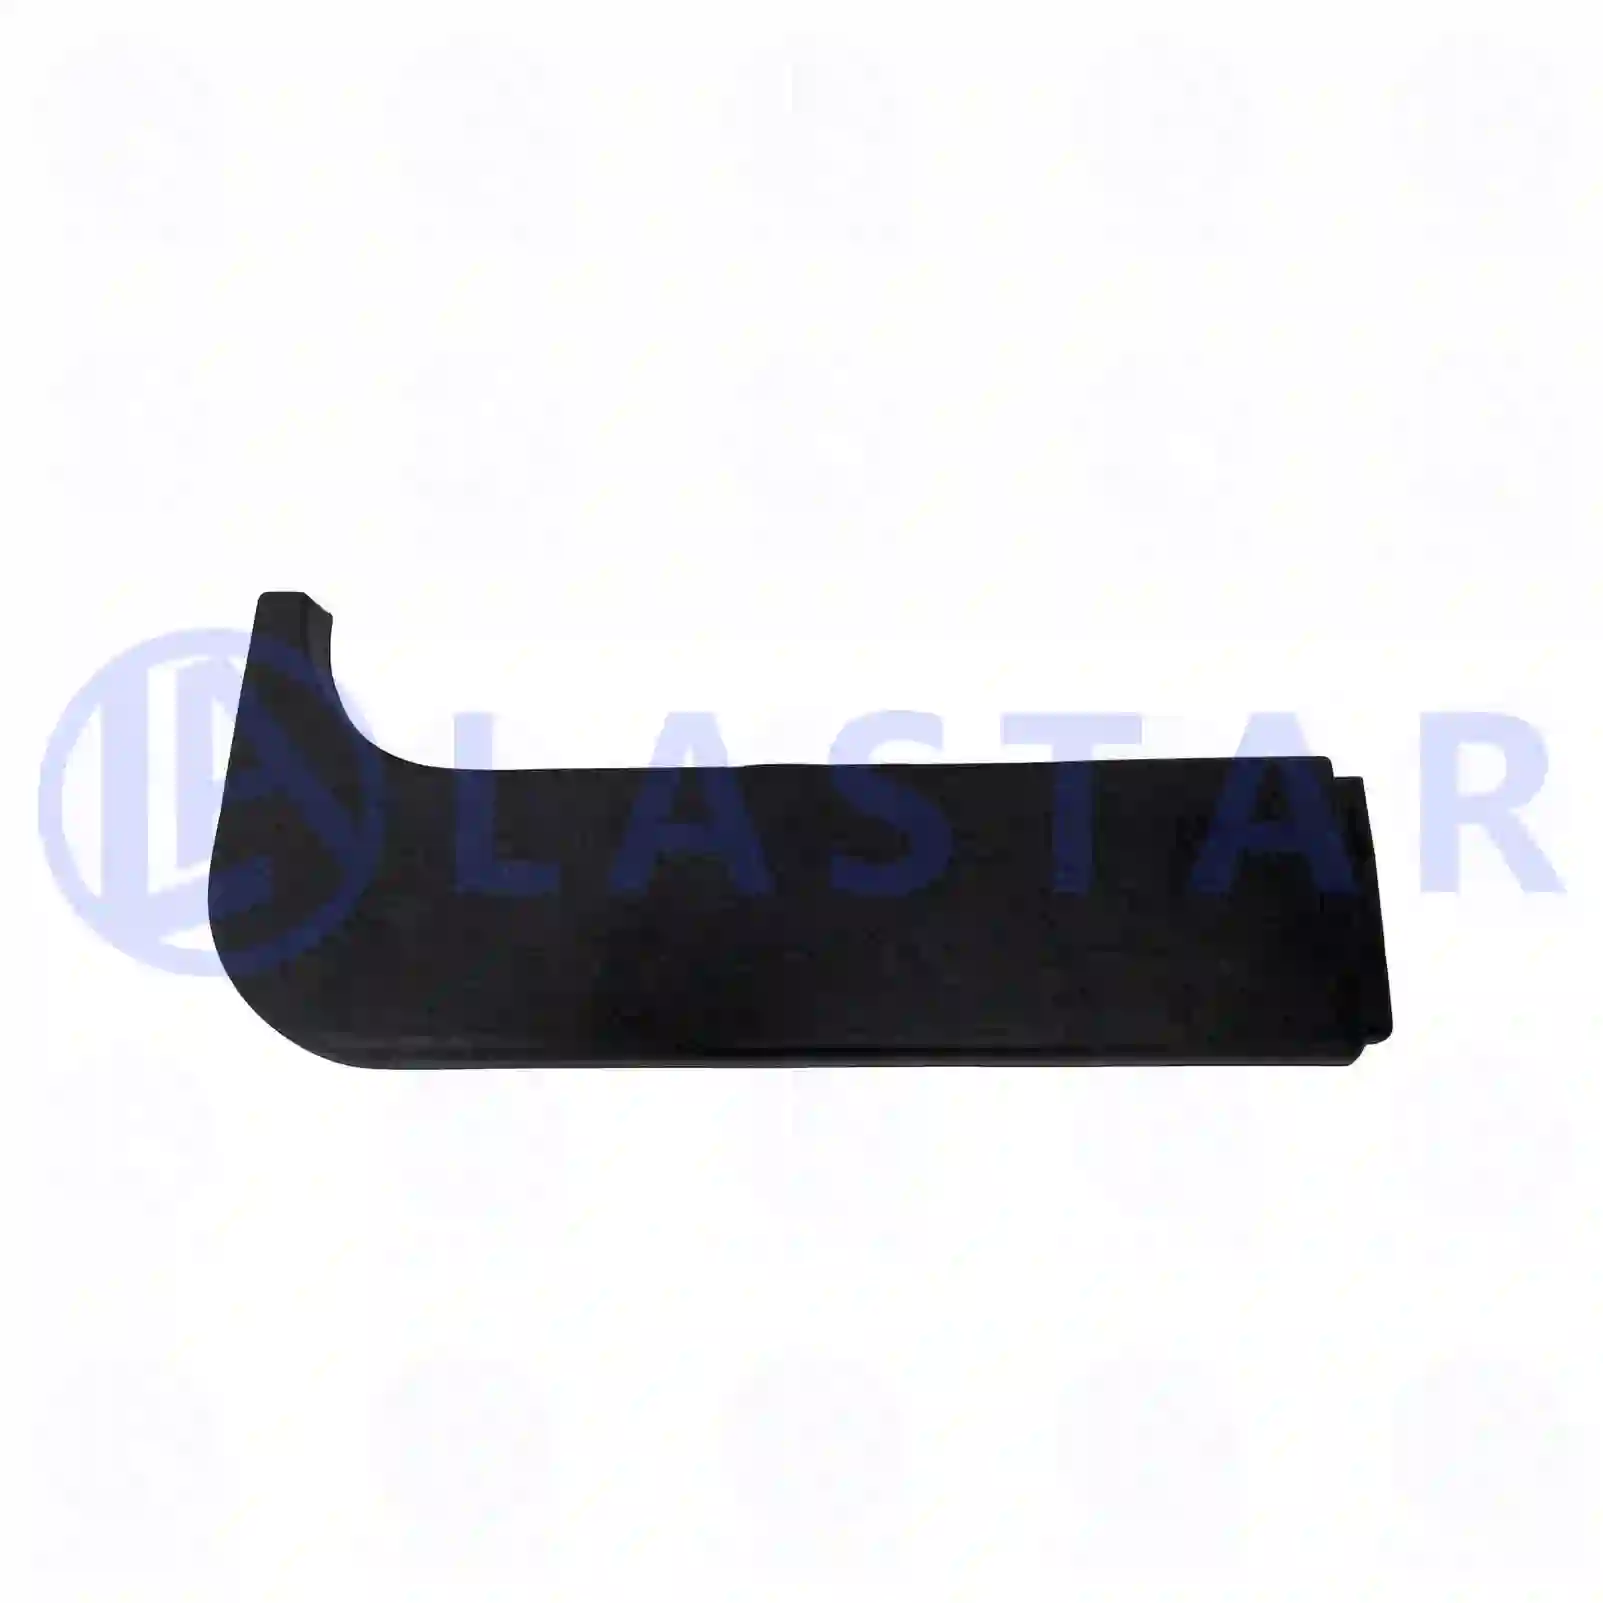 Mirror cover, kerb observation mirror, left, 77719993, 1736920, 5010578517, 20707813 ||  77719993 Lastar Spare Part | Truck Spare Parts, Auotomotive Spare Parts Mirror cover, kerb observation mirror, left, 77719993, 1736920, 5010578517, 20707813 ||  77719993 Lastar Spare Part | Truck Spare Parts, Auotomotive Spare Parts